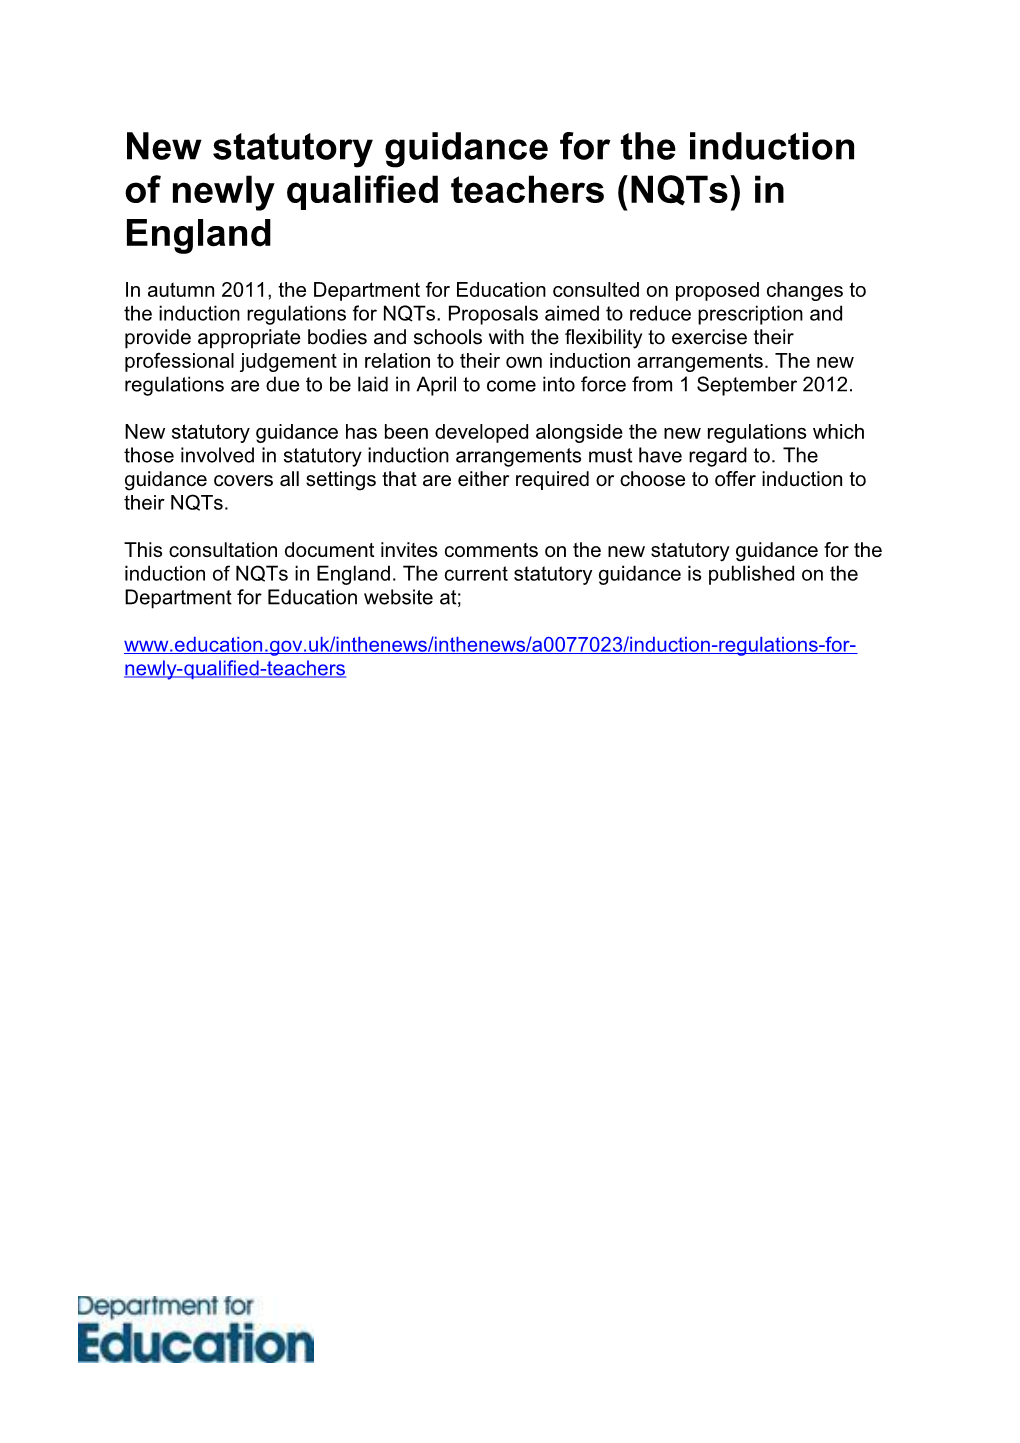 New Statutory Guidance for the Induction of Newly Qualified Teachers (Nqts) in England